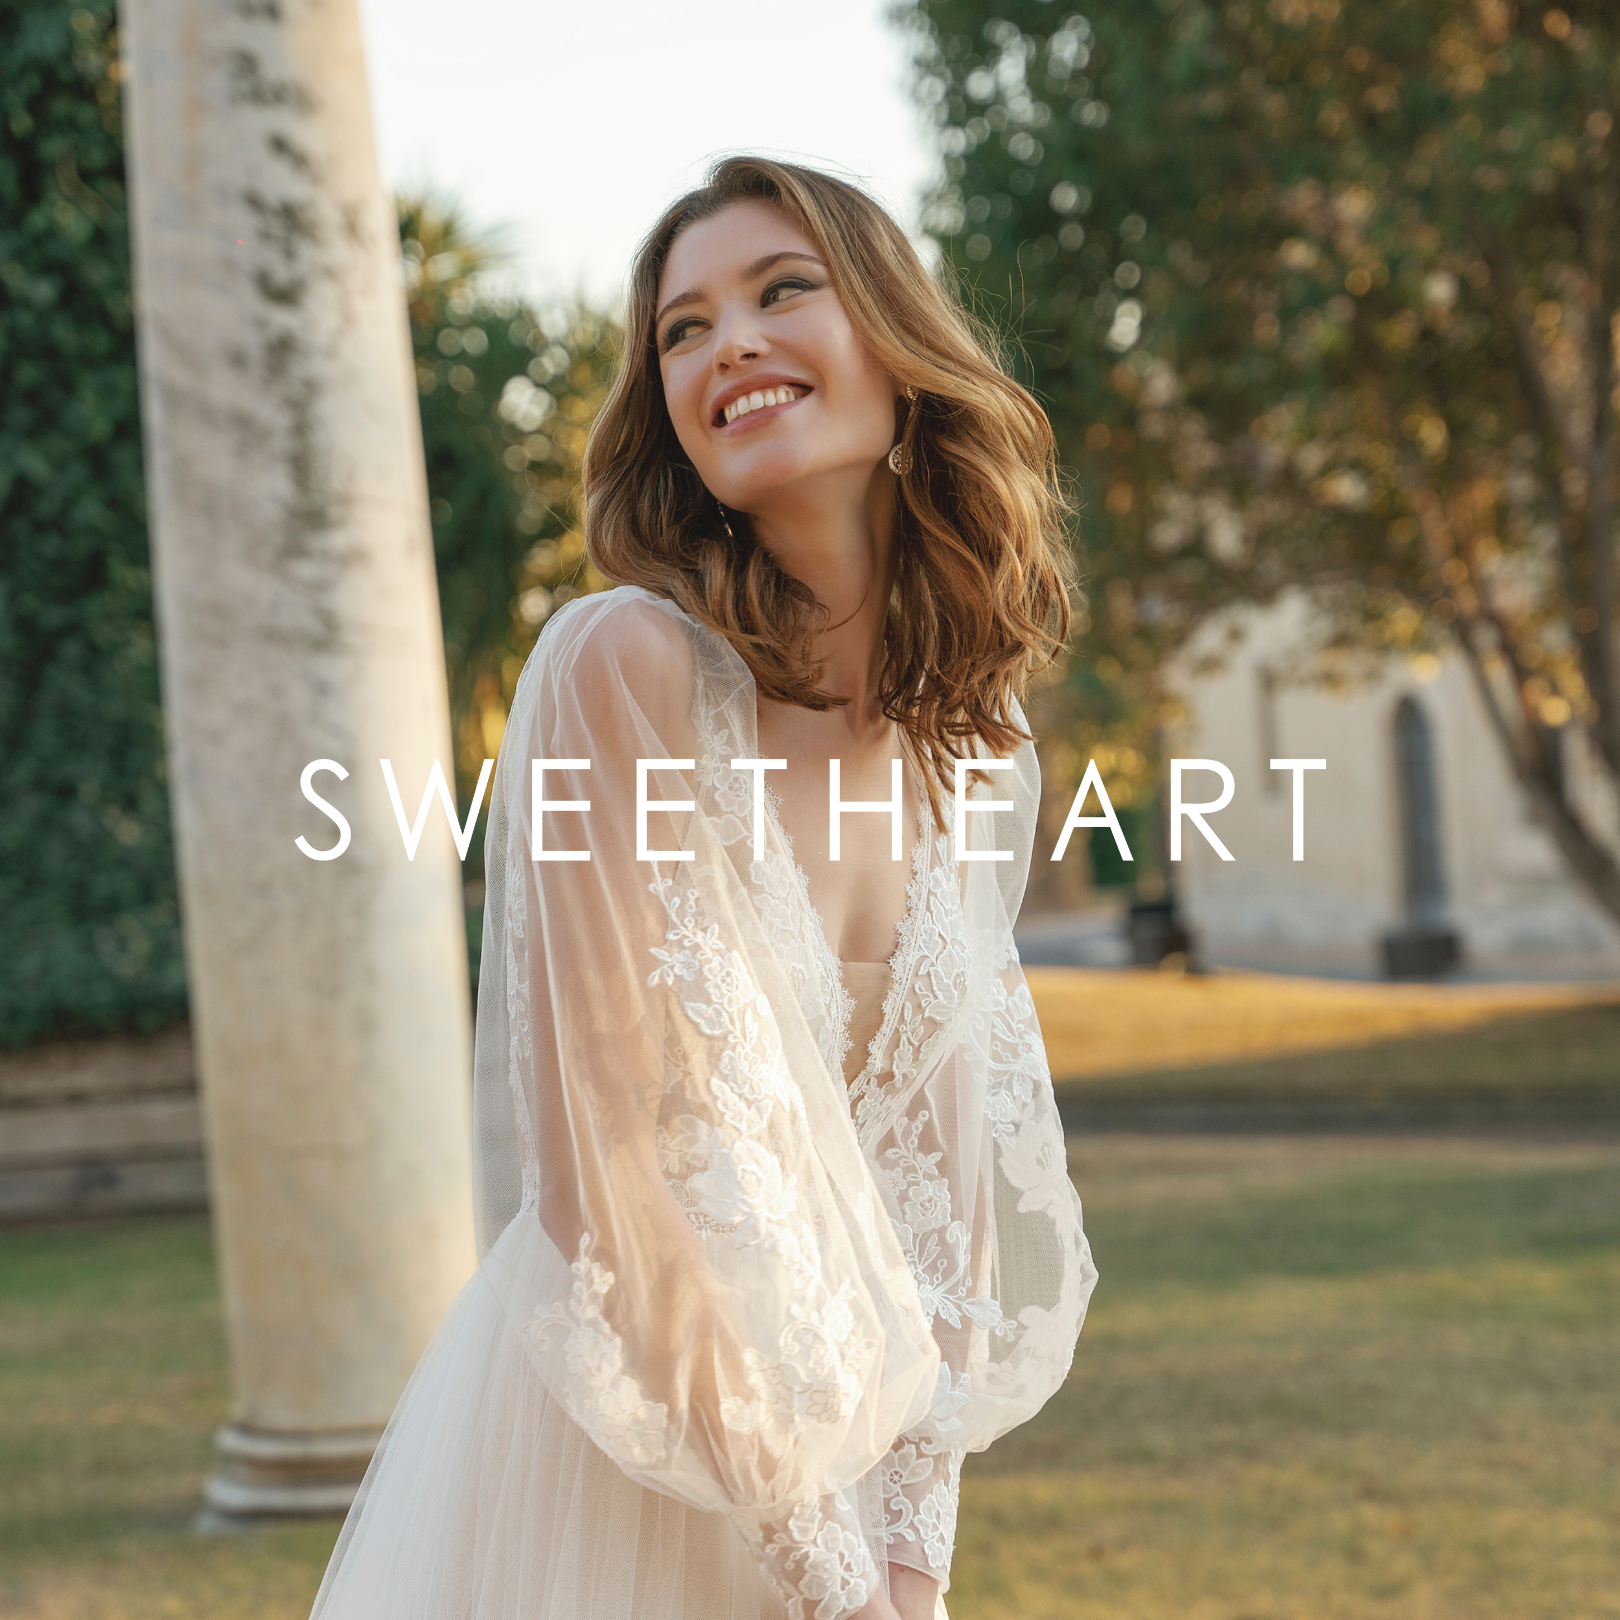 Sweetheart: Unveiling life's happily-ever-after moments